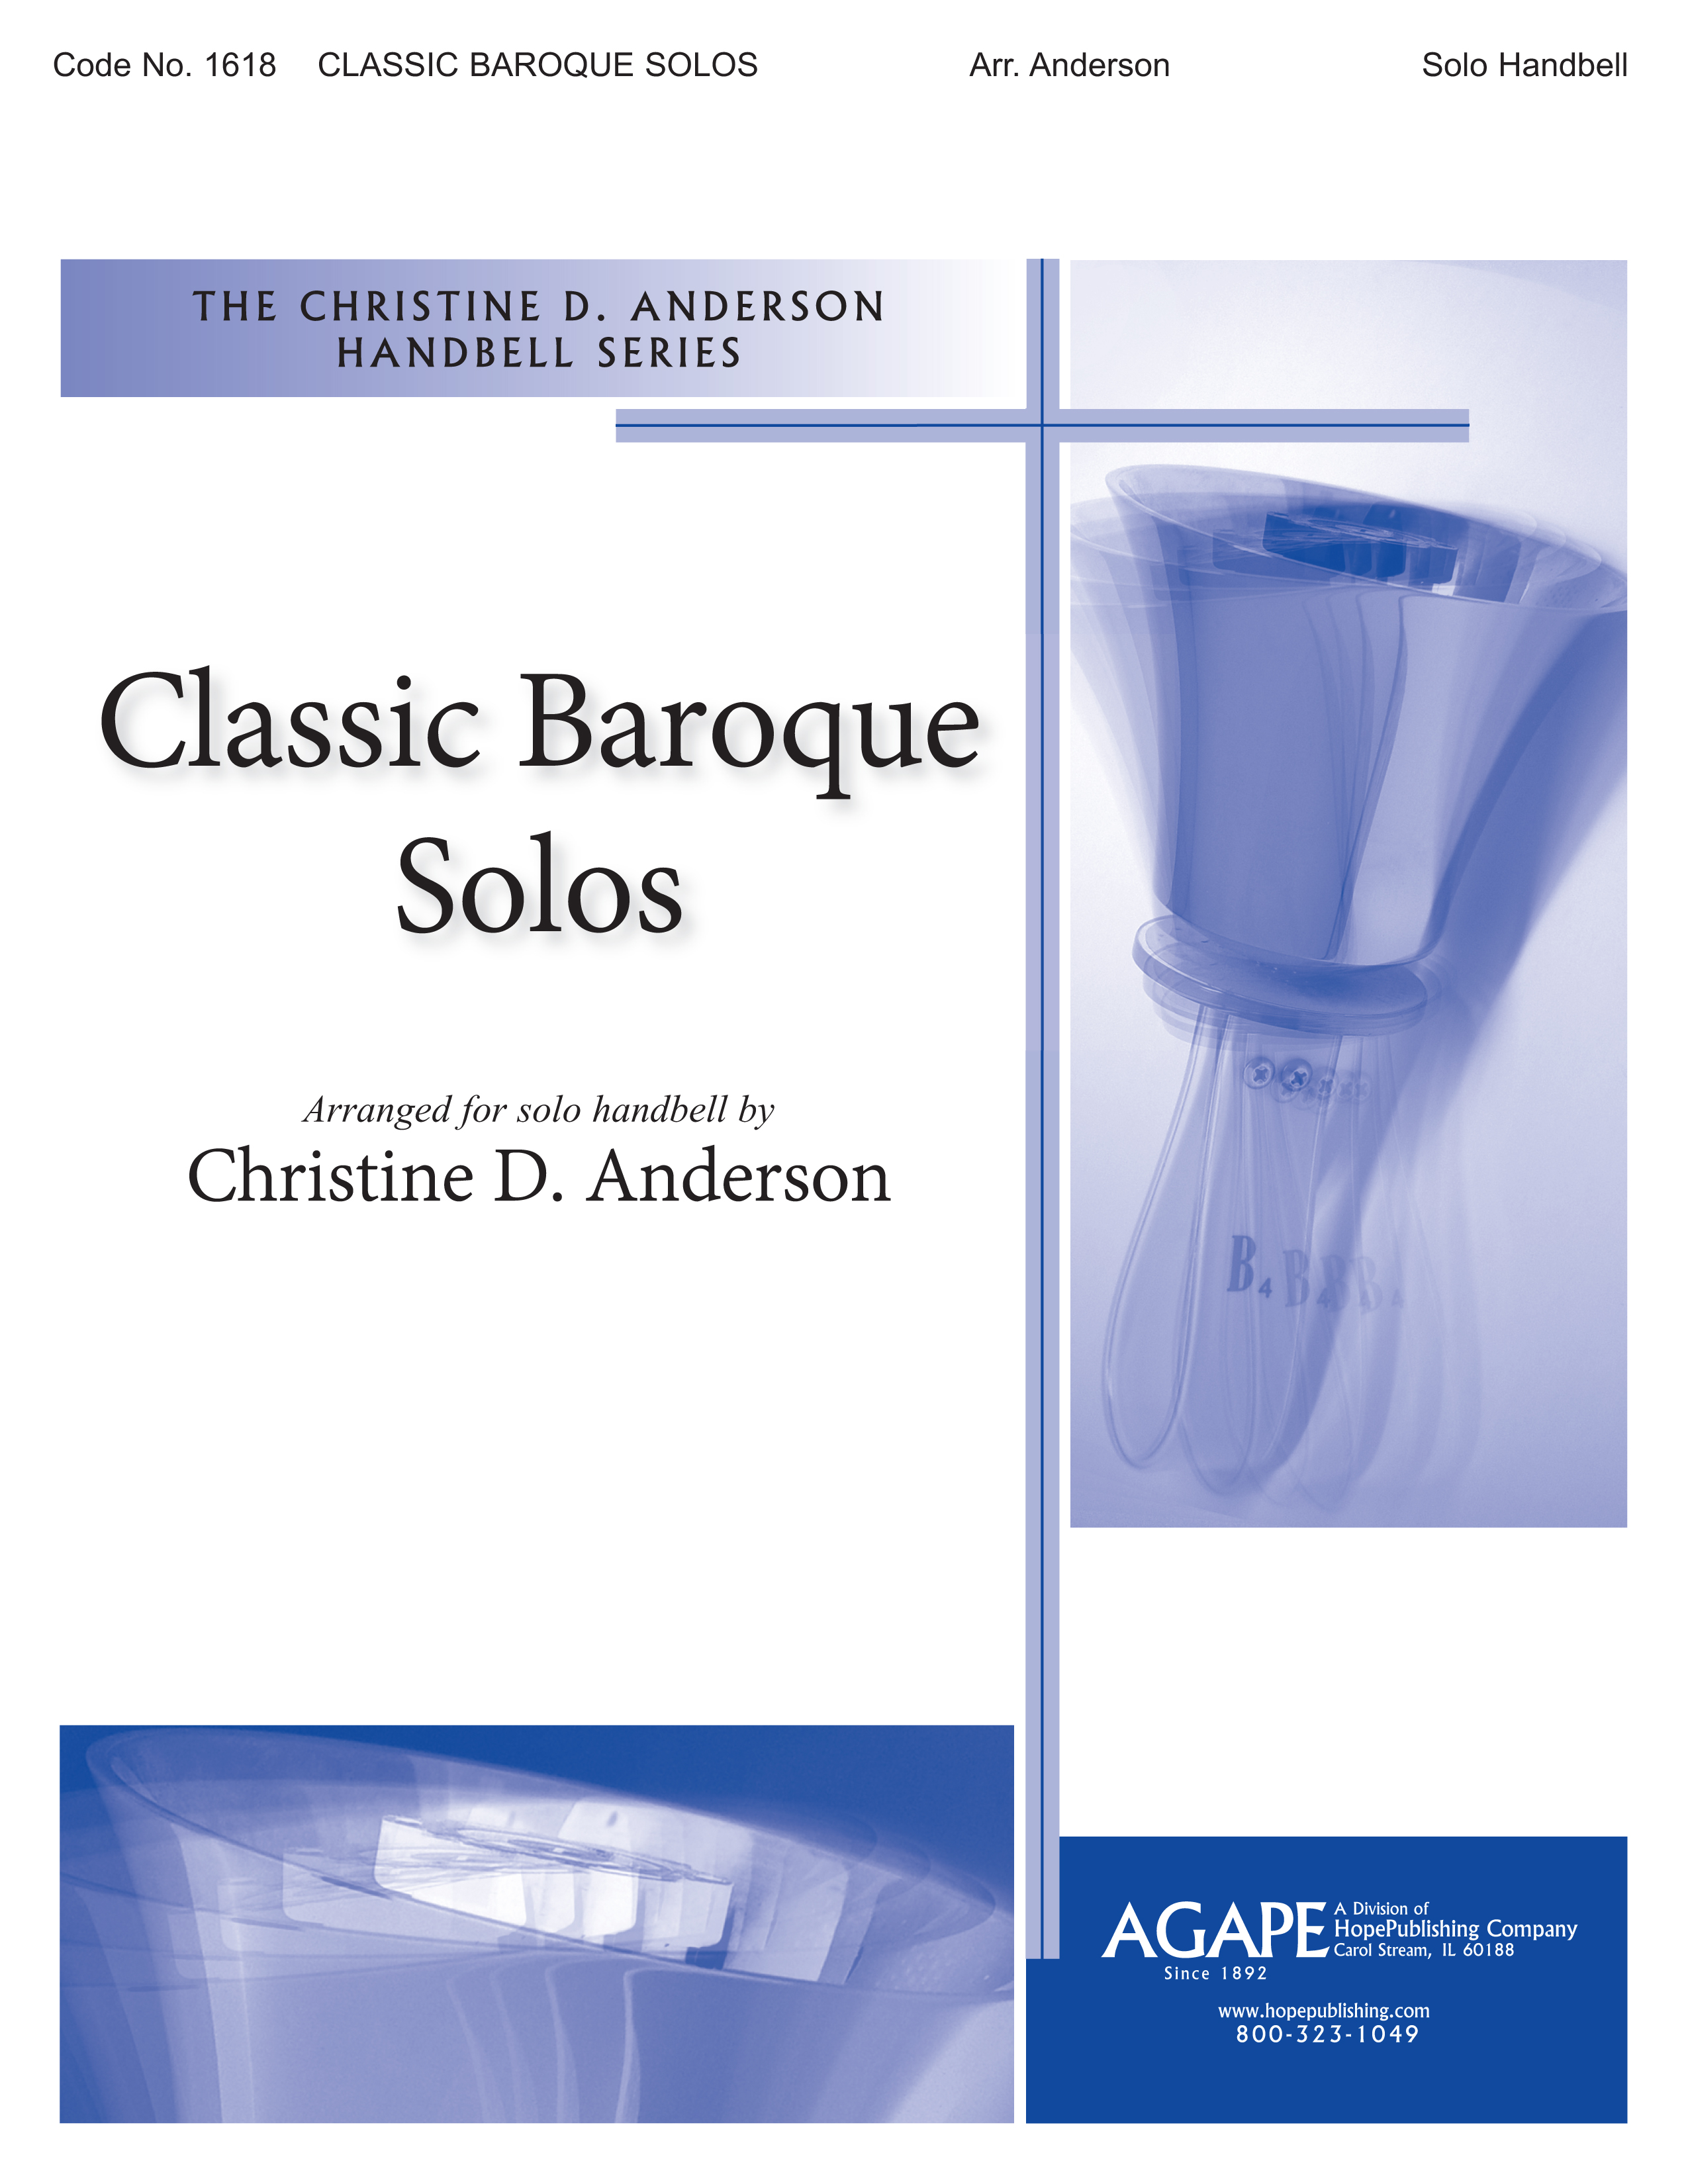 Classic Baroque Solos - Handbell Solo Collection Cover Image